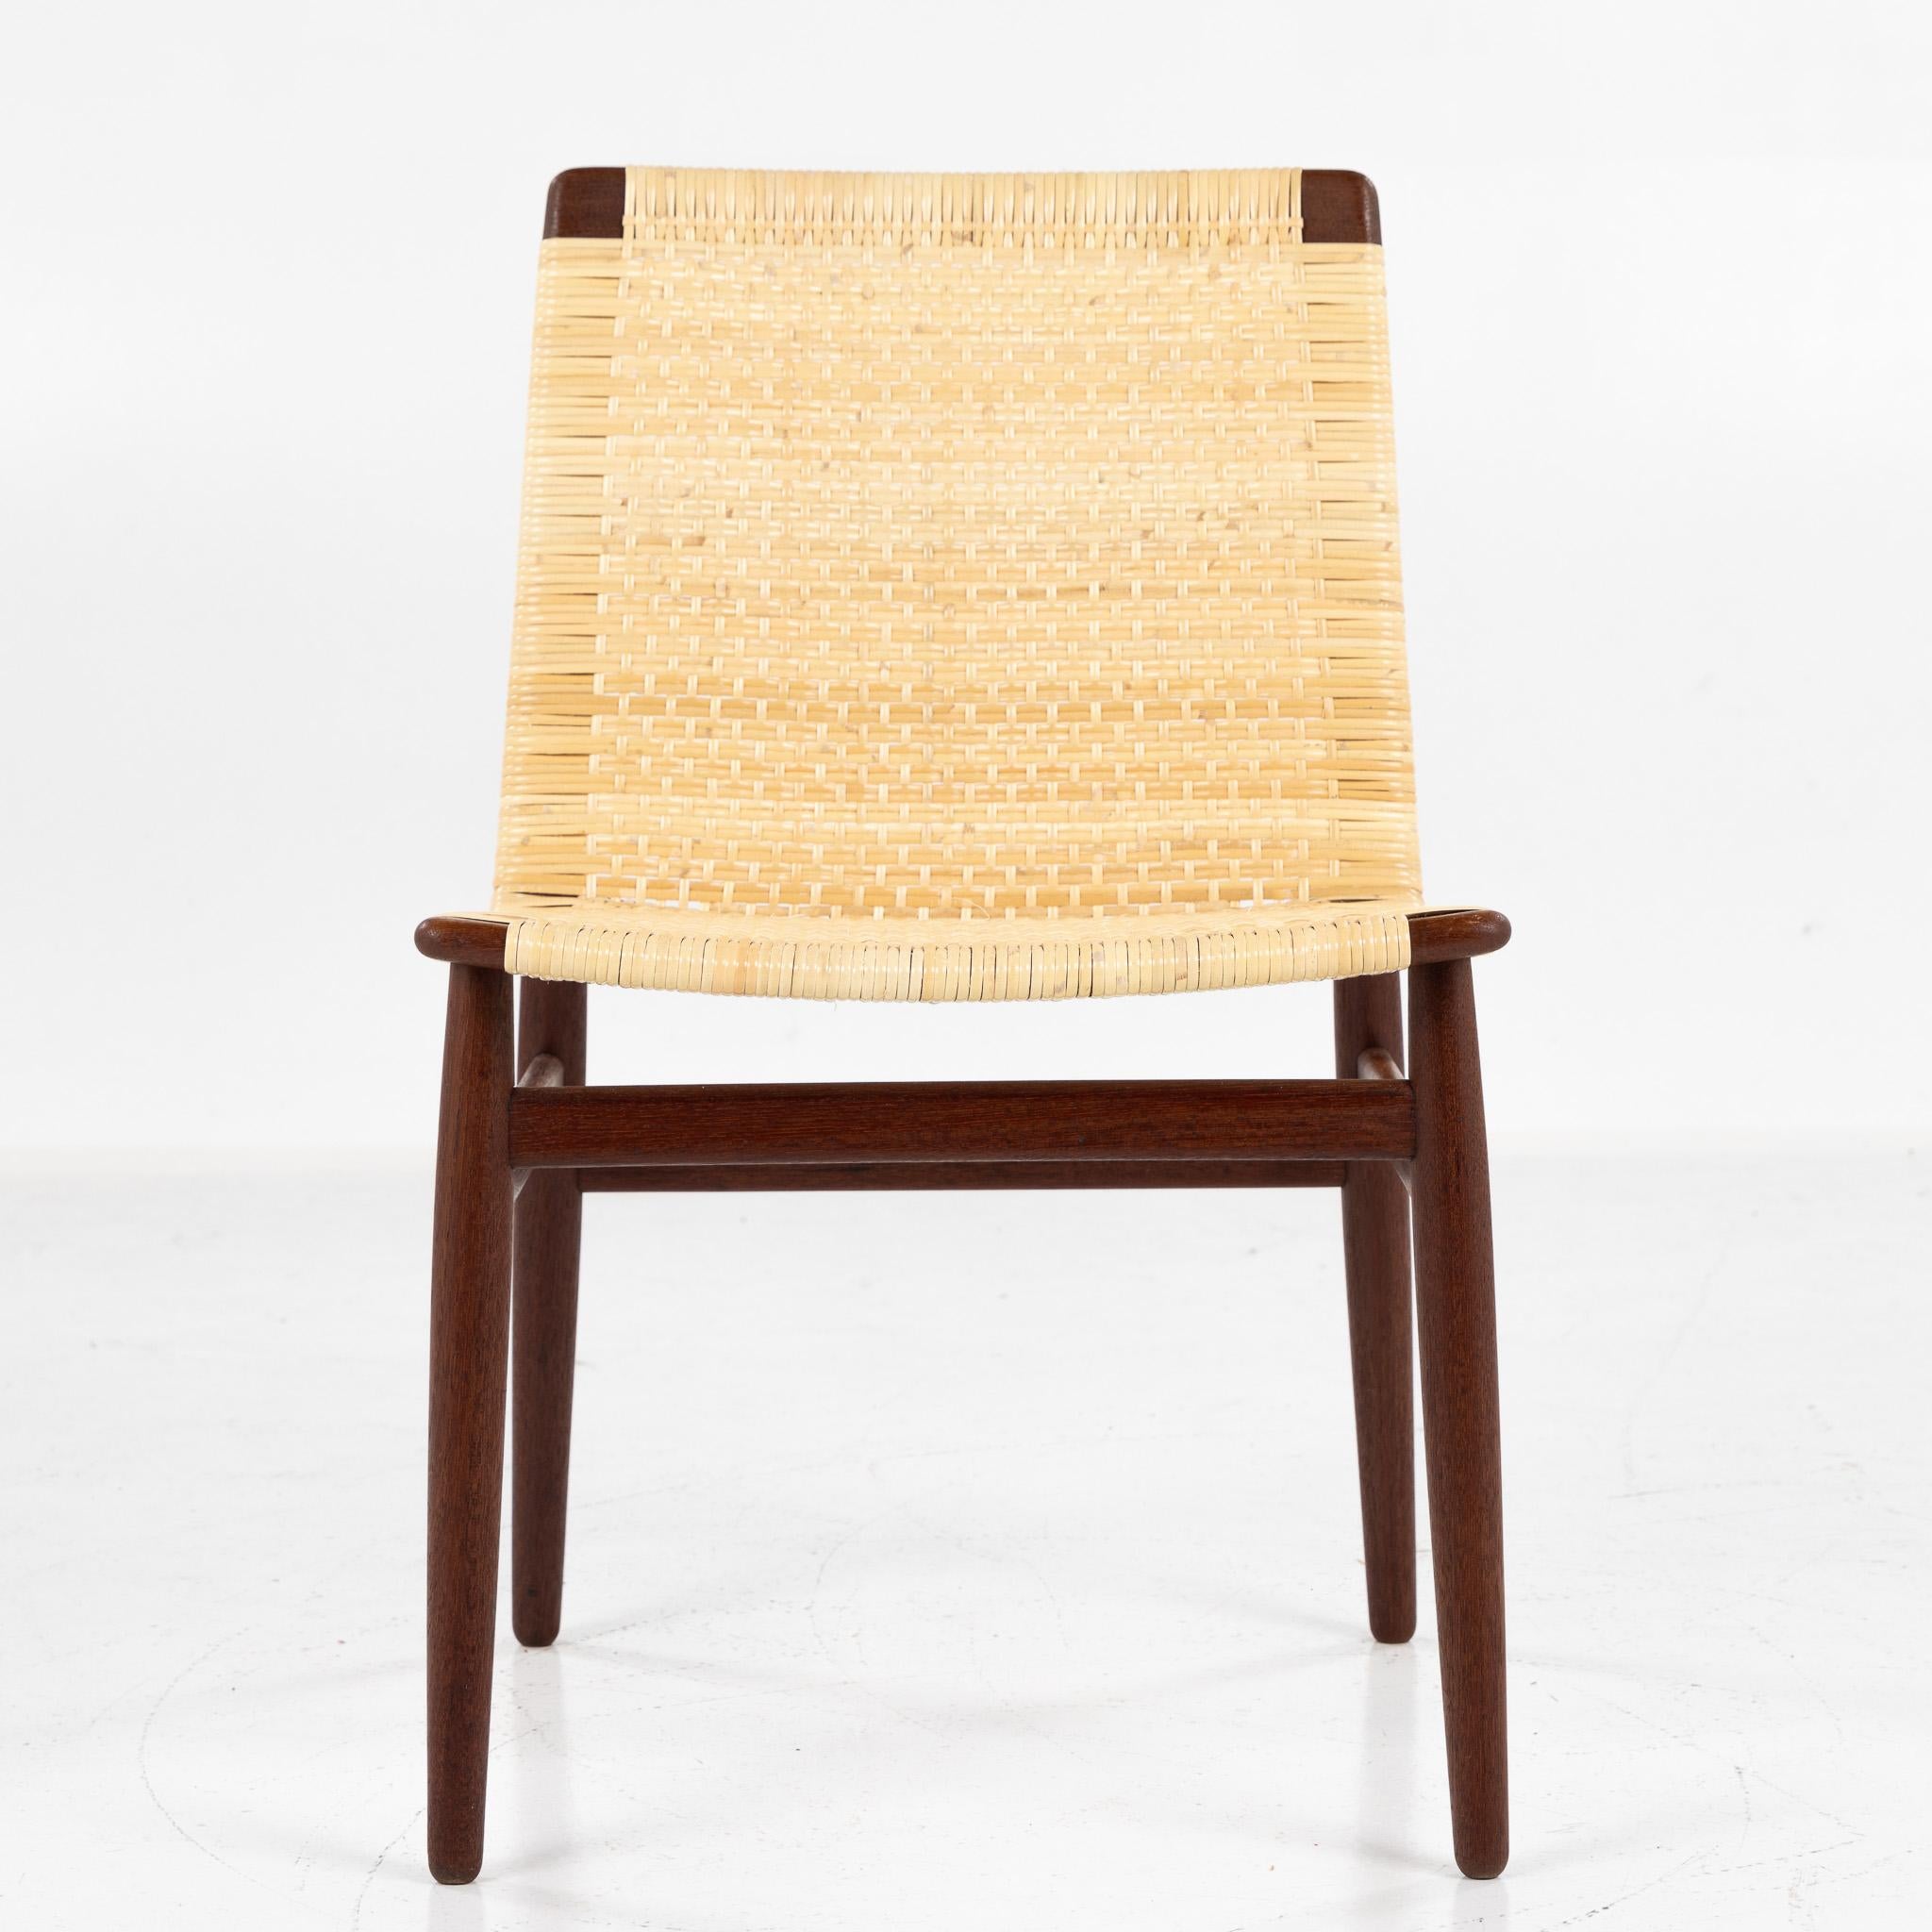 Set of eight rare dining chairs in solid teak with seat and back in new cane. Designed in 1951 by architect Jørgen Høj.